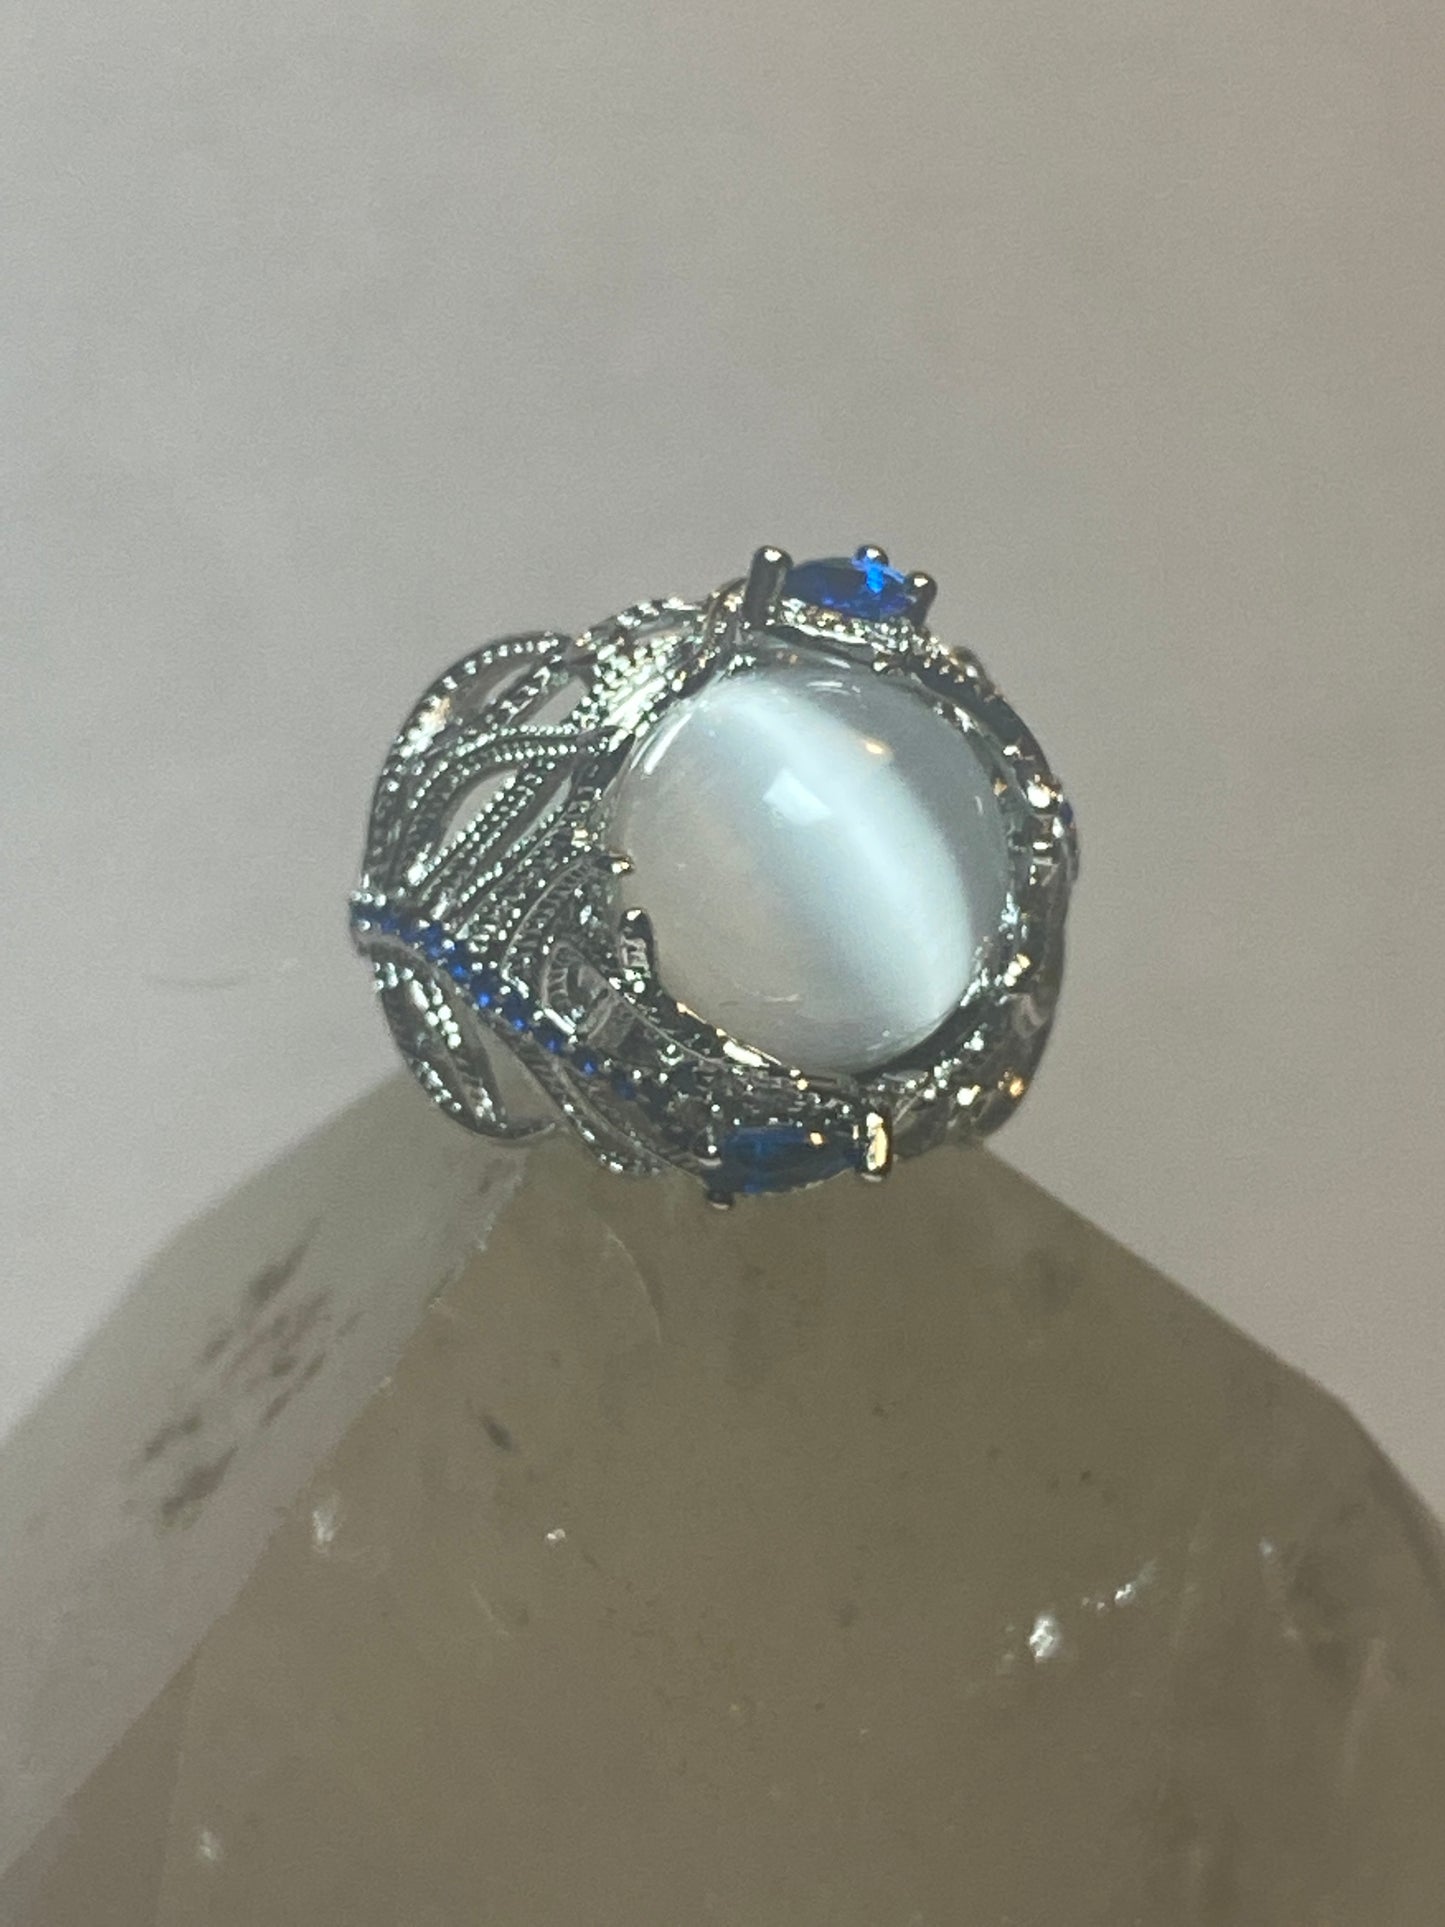 Moonglow ring floral blue stones? sterling silver women girls